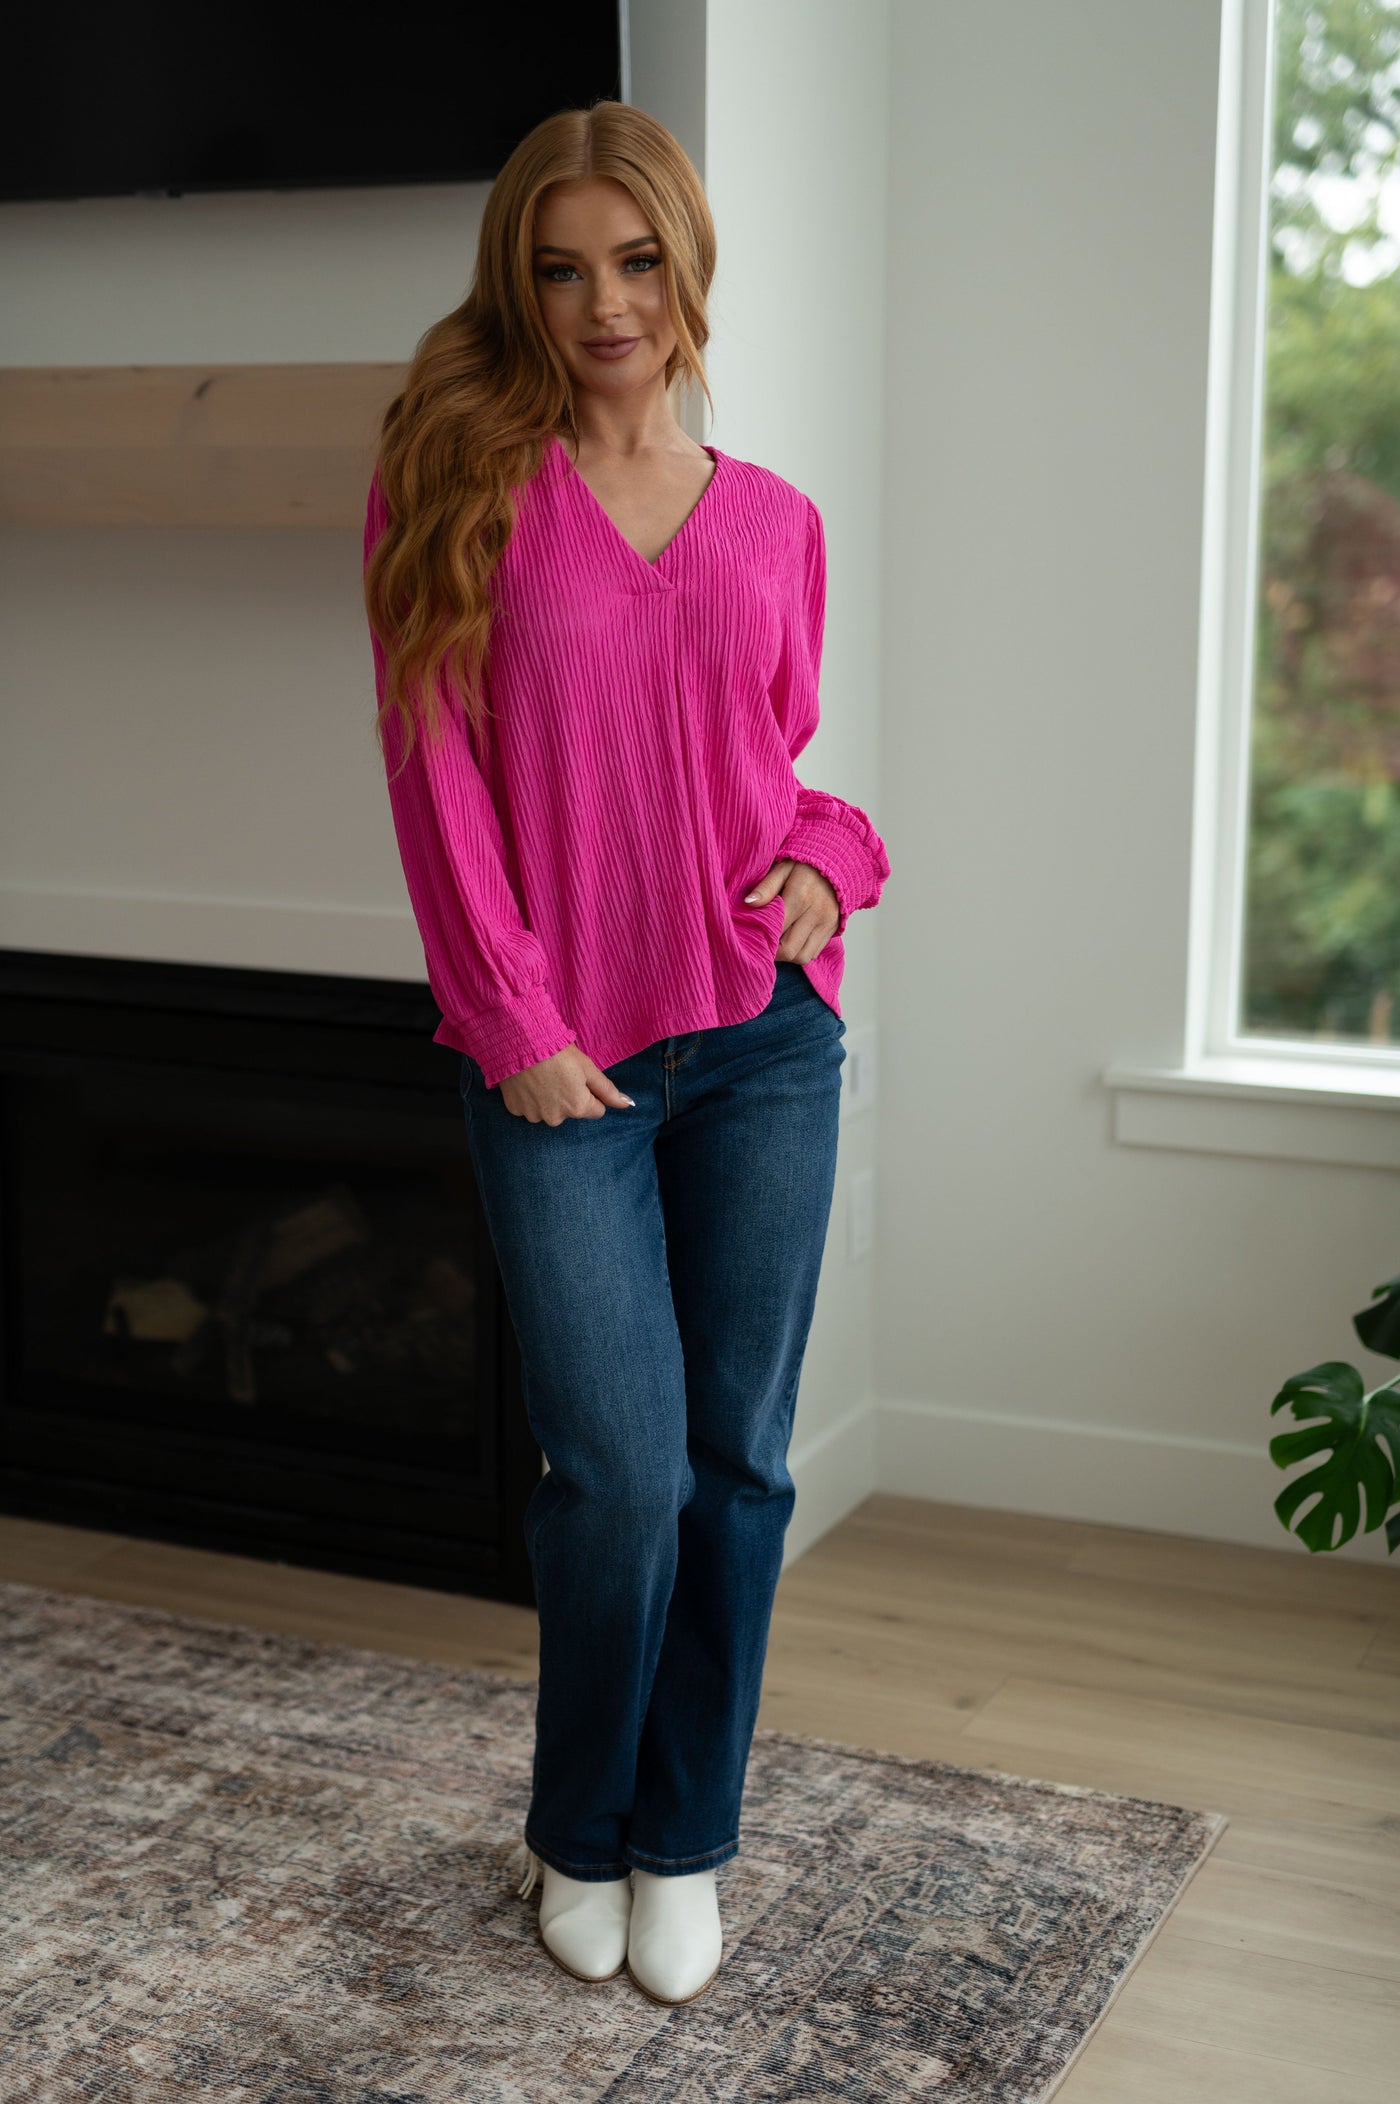 This Very Refined V-Neck Blouse is an effortless look to take you through the season. Crafted from textured fabric, it features a pleated v-neckline, balloon sleeves and smocked elastic cuffs for an easy, comfortable fit.